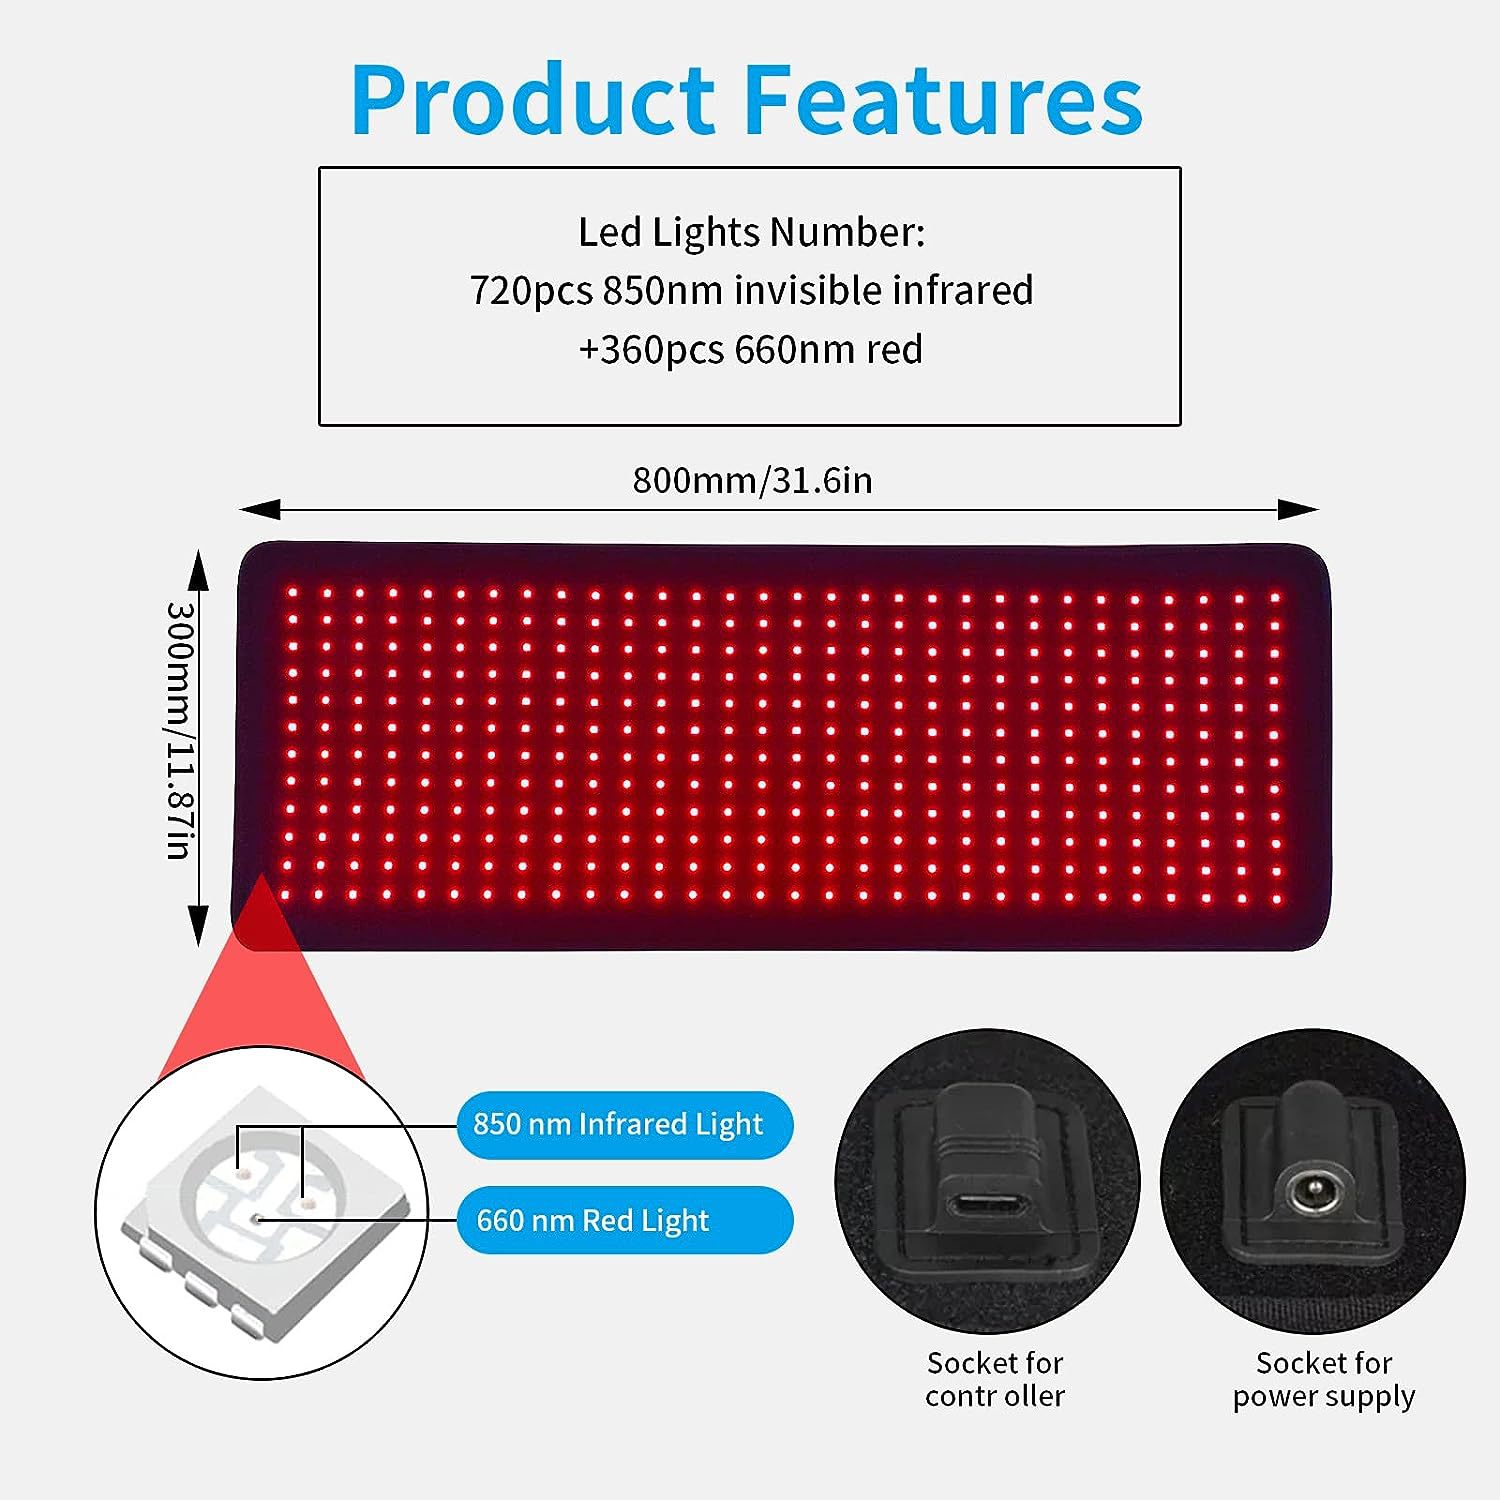 Cross-Border New Arrival Wireless Red Light 360 Beads Heating Whole Body Phototherapy Pad Red Light Infrared Pulse Belt